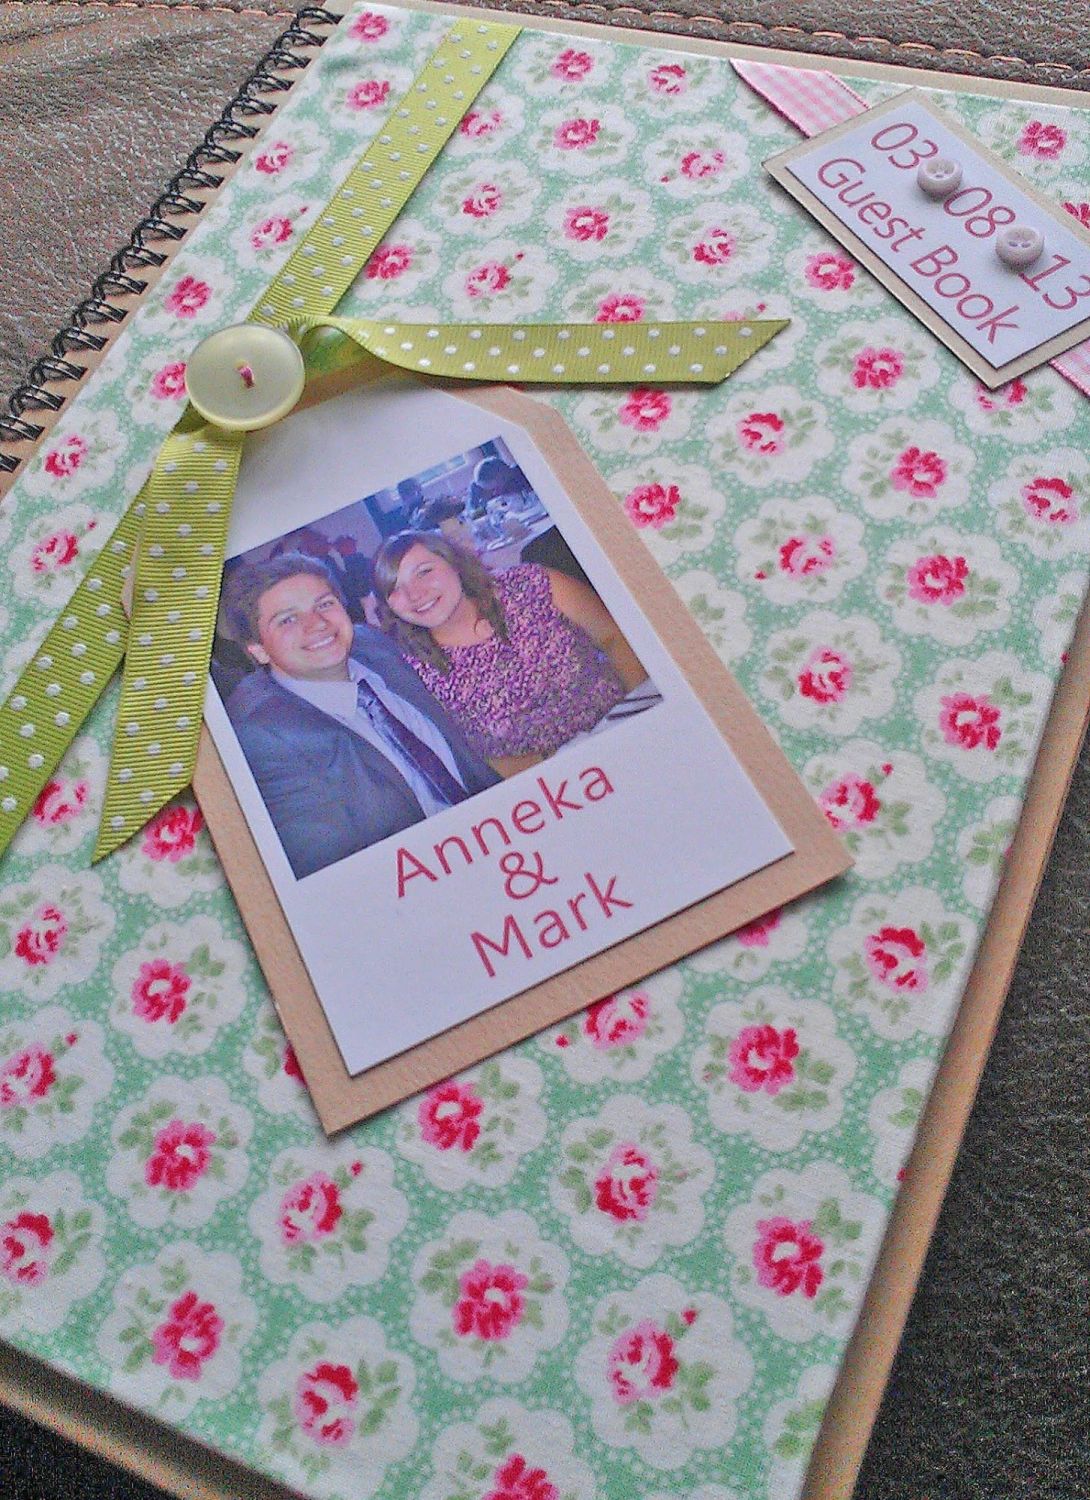 Themed fabric photo guest book